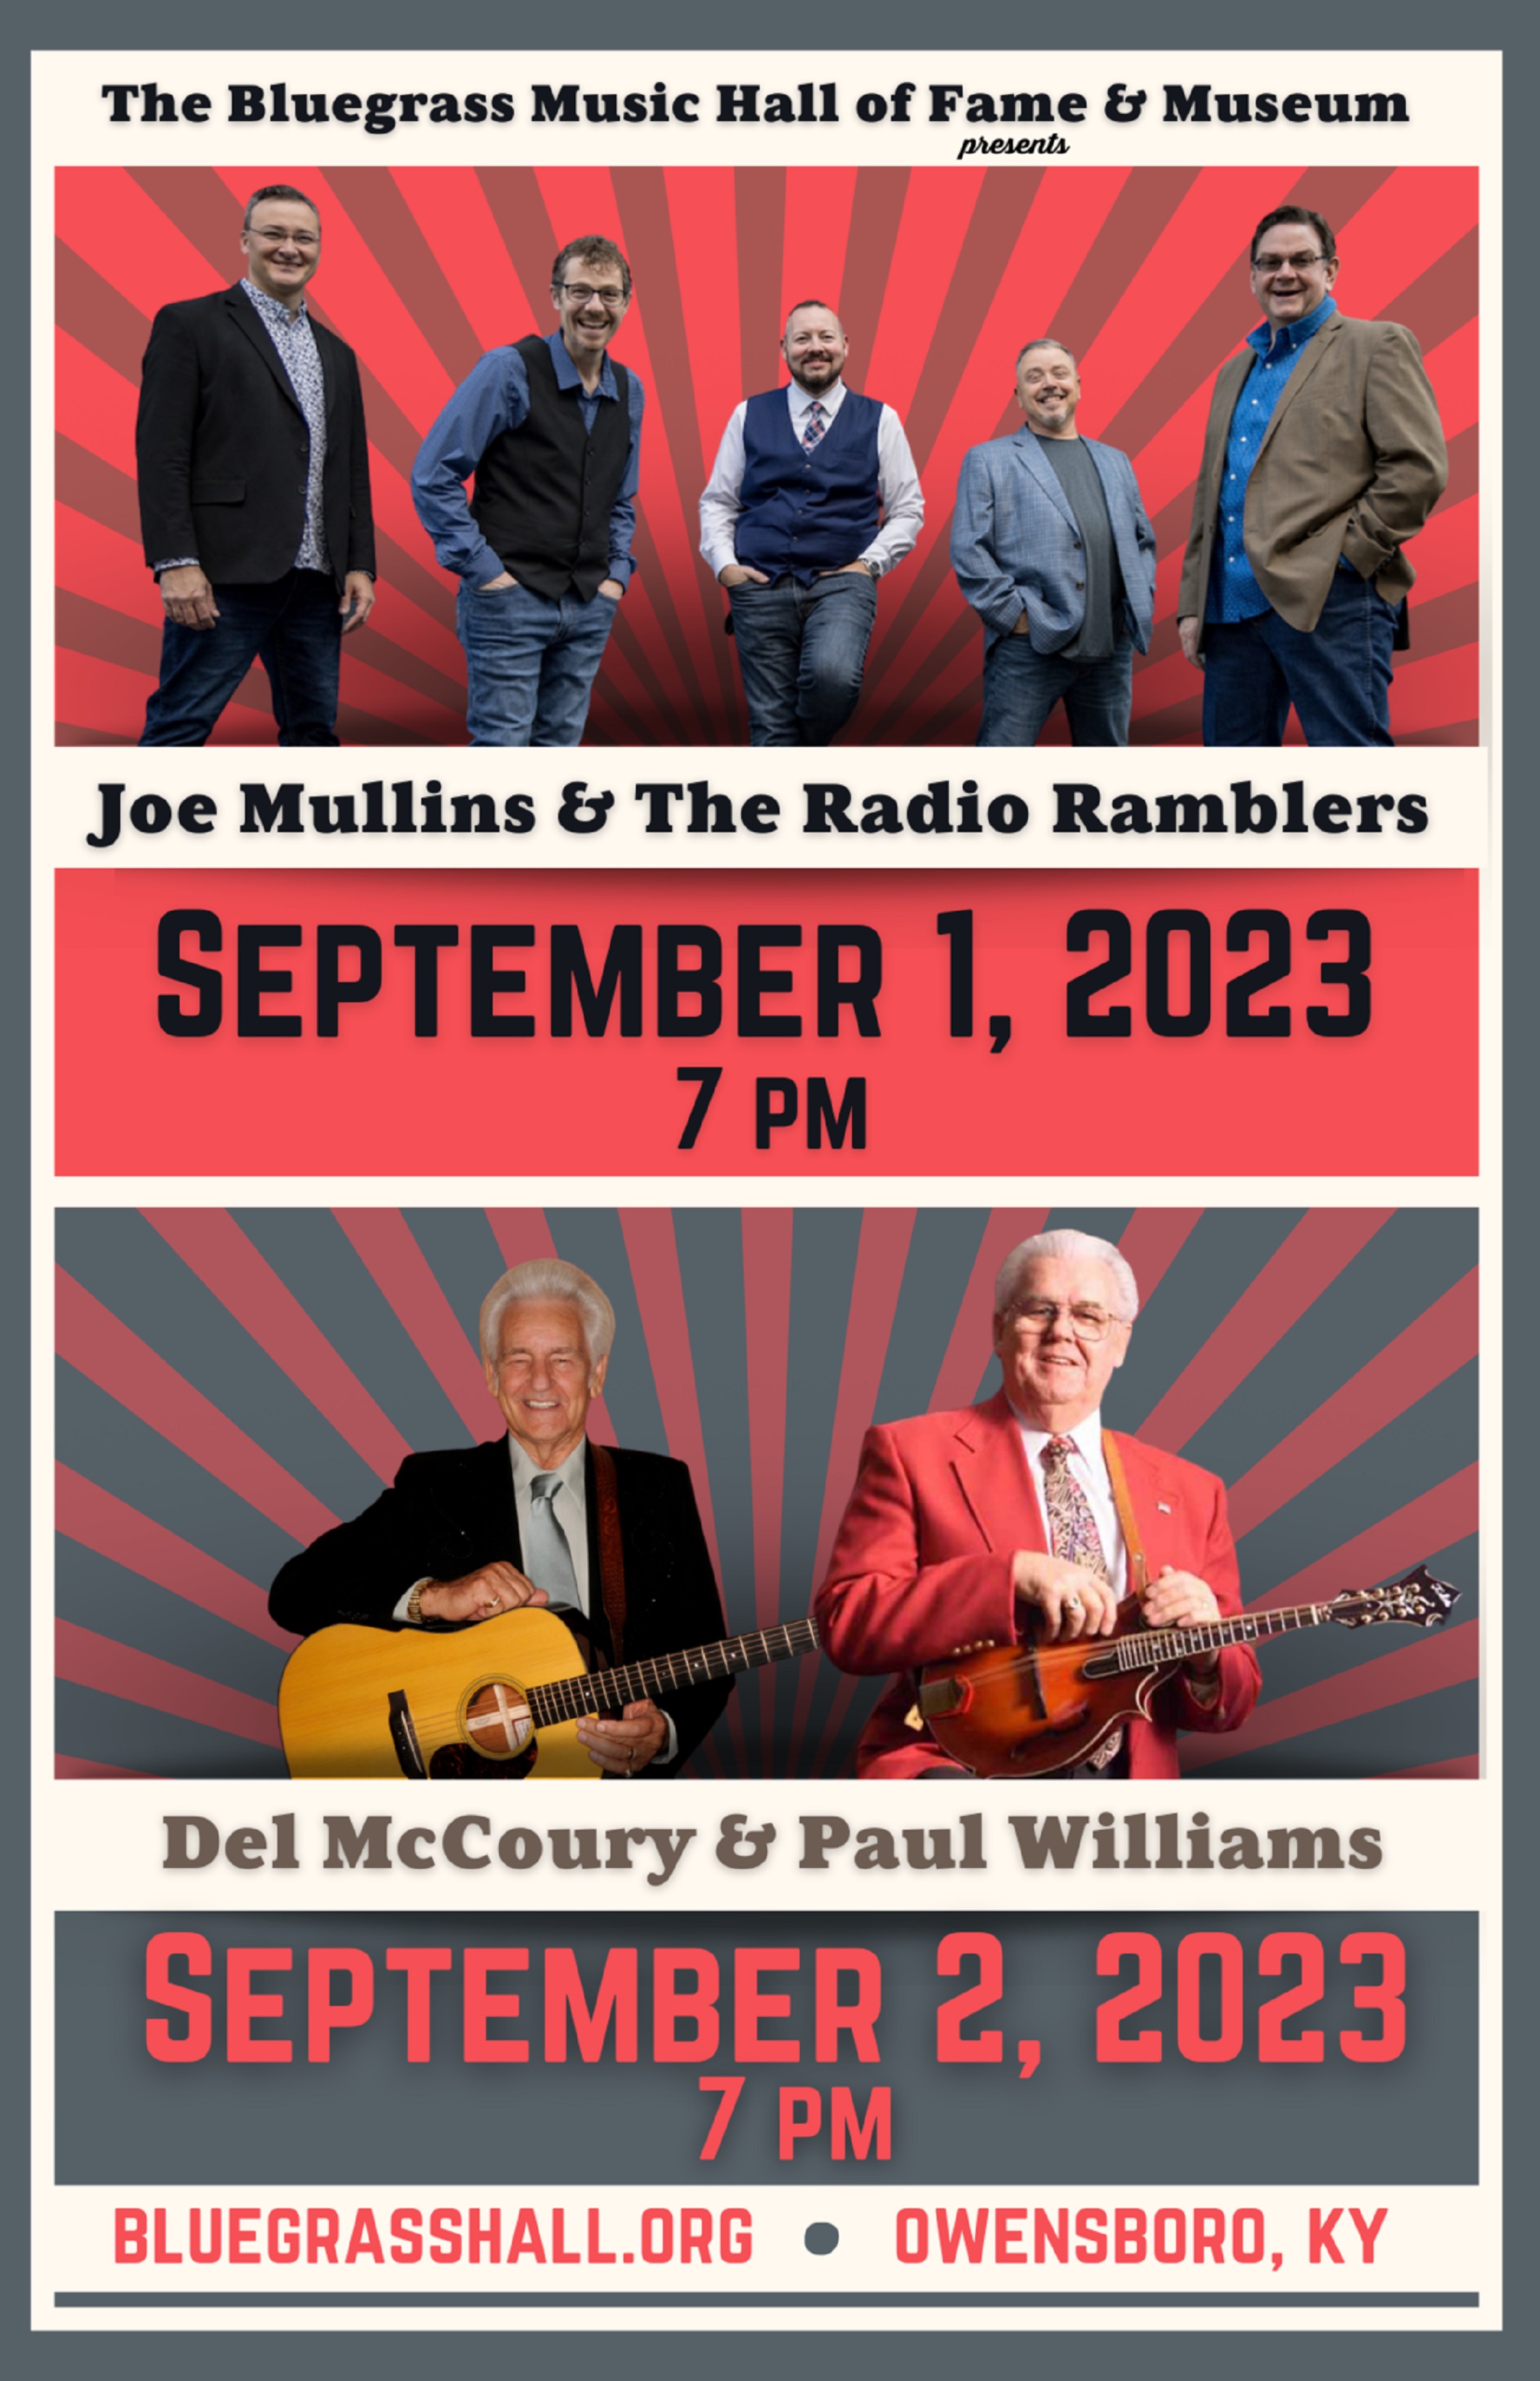 Del McCoury Added To Bluegrass Hall of Fame Weekend with Paul Williams, Joe Mullins & The Radio Ramblers